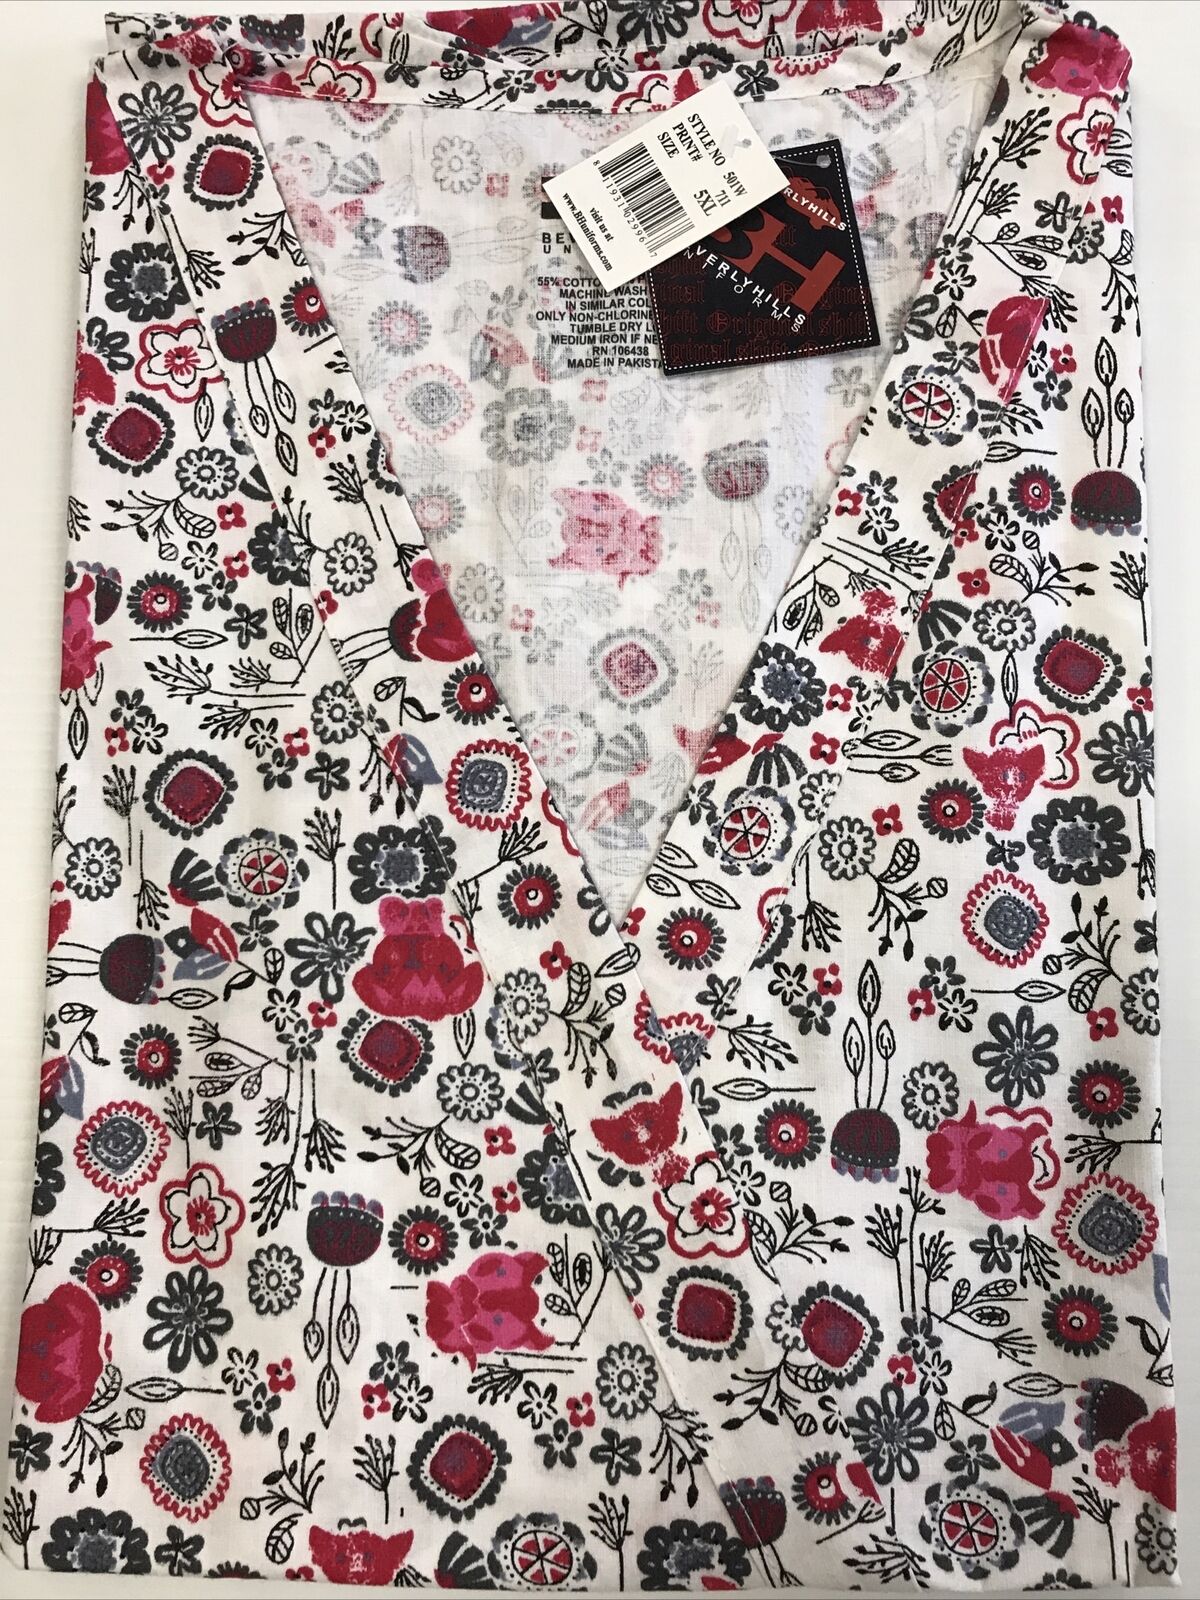 Beverly Hills Scrub Top (ALL SALES ARE FINAL. NO RESTOCK)